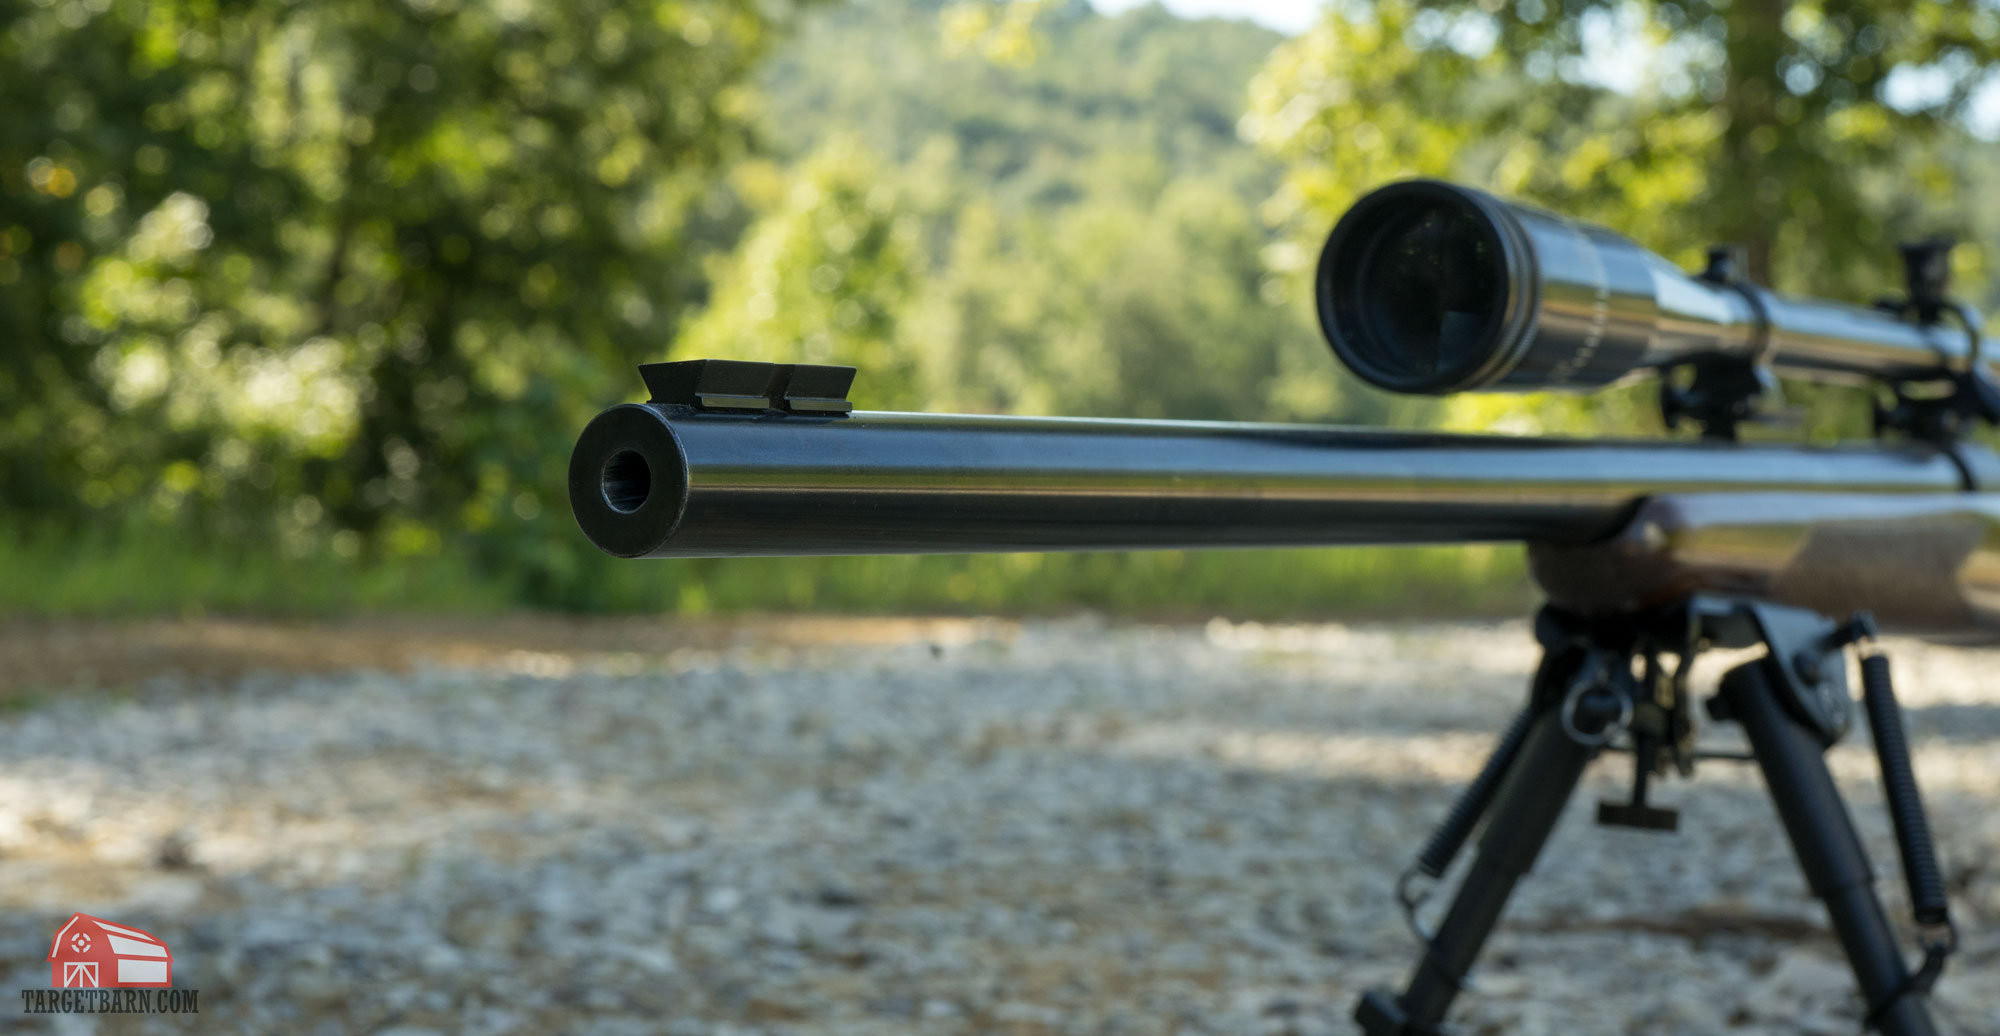 a rifle bull barrel that is heavier and thicker in diameter than the original design